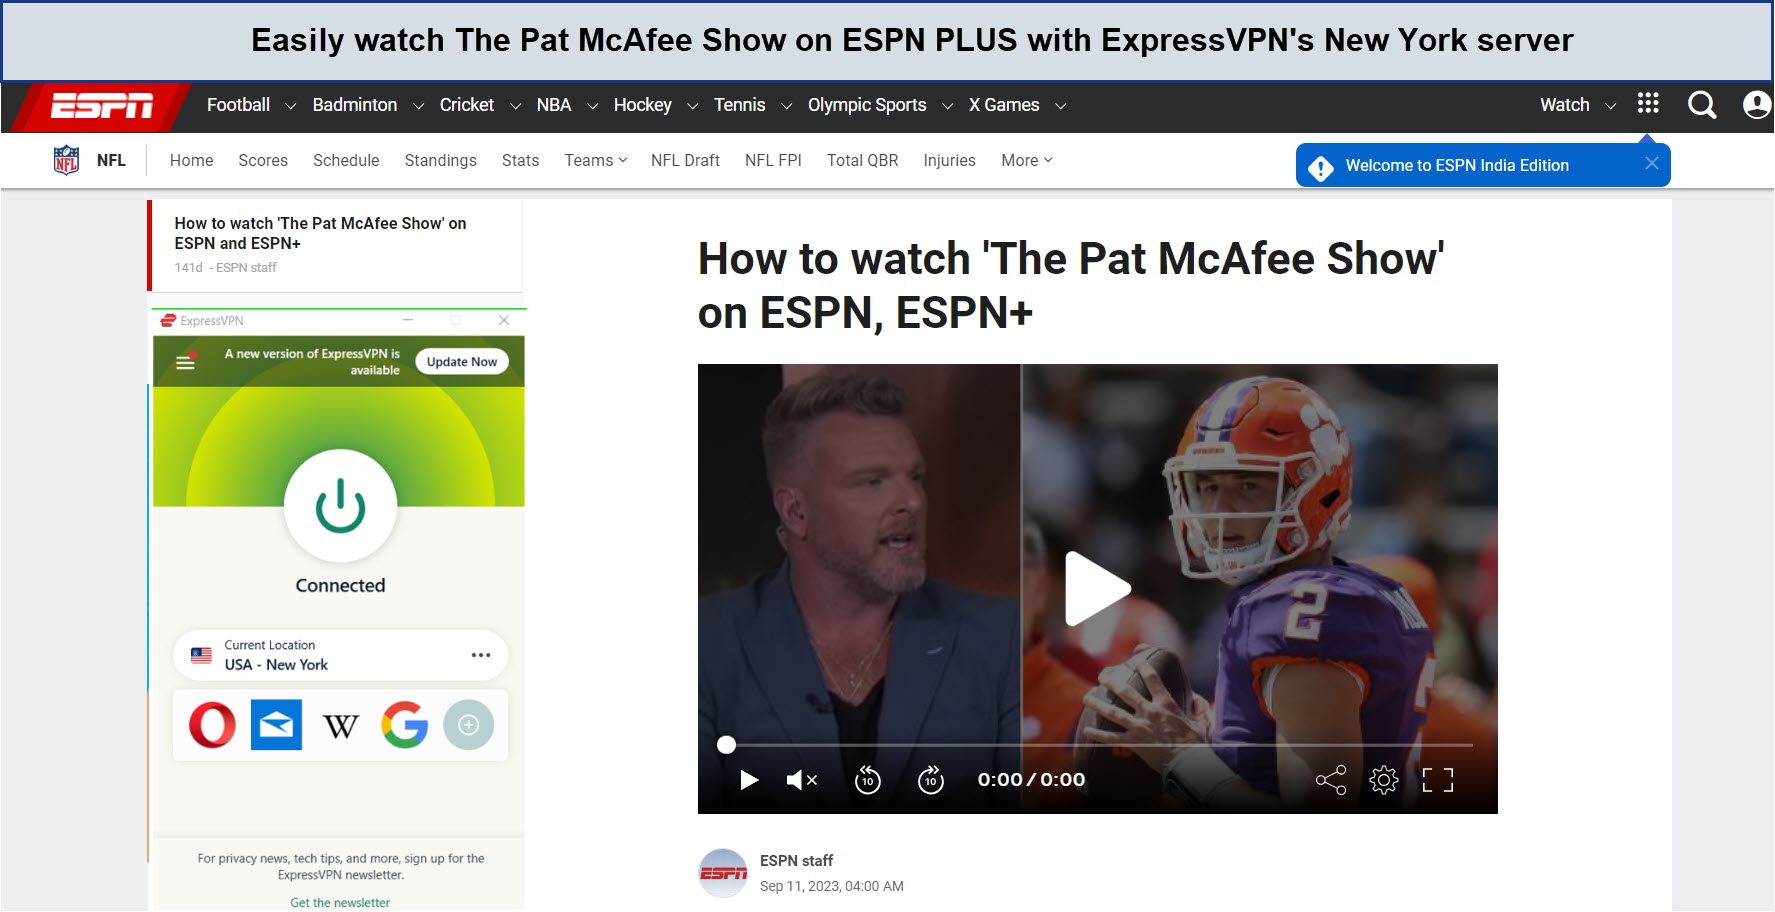 watch-The-Pat-McAfee-Show-on-ESPN-PLUS-with-ExpressVPN-in-Australia